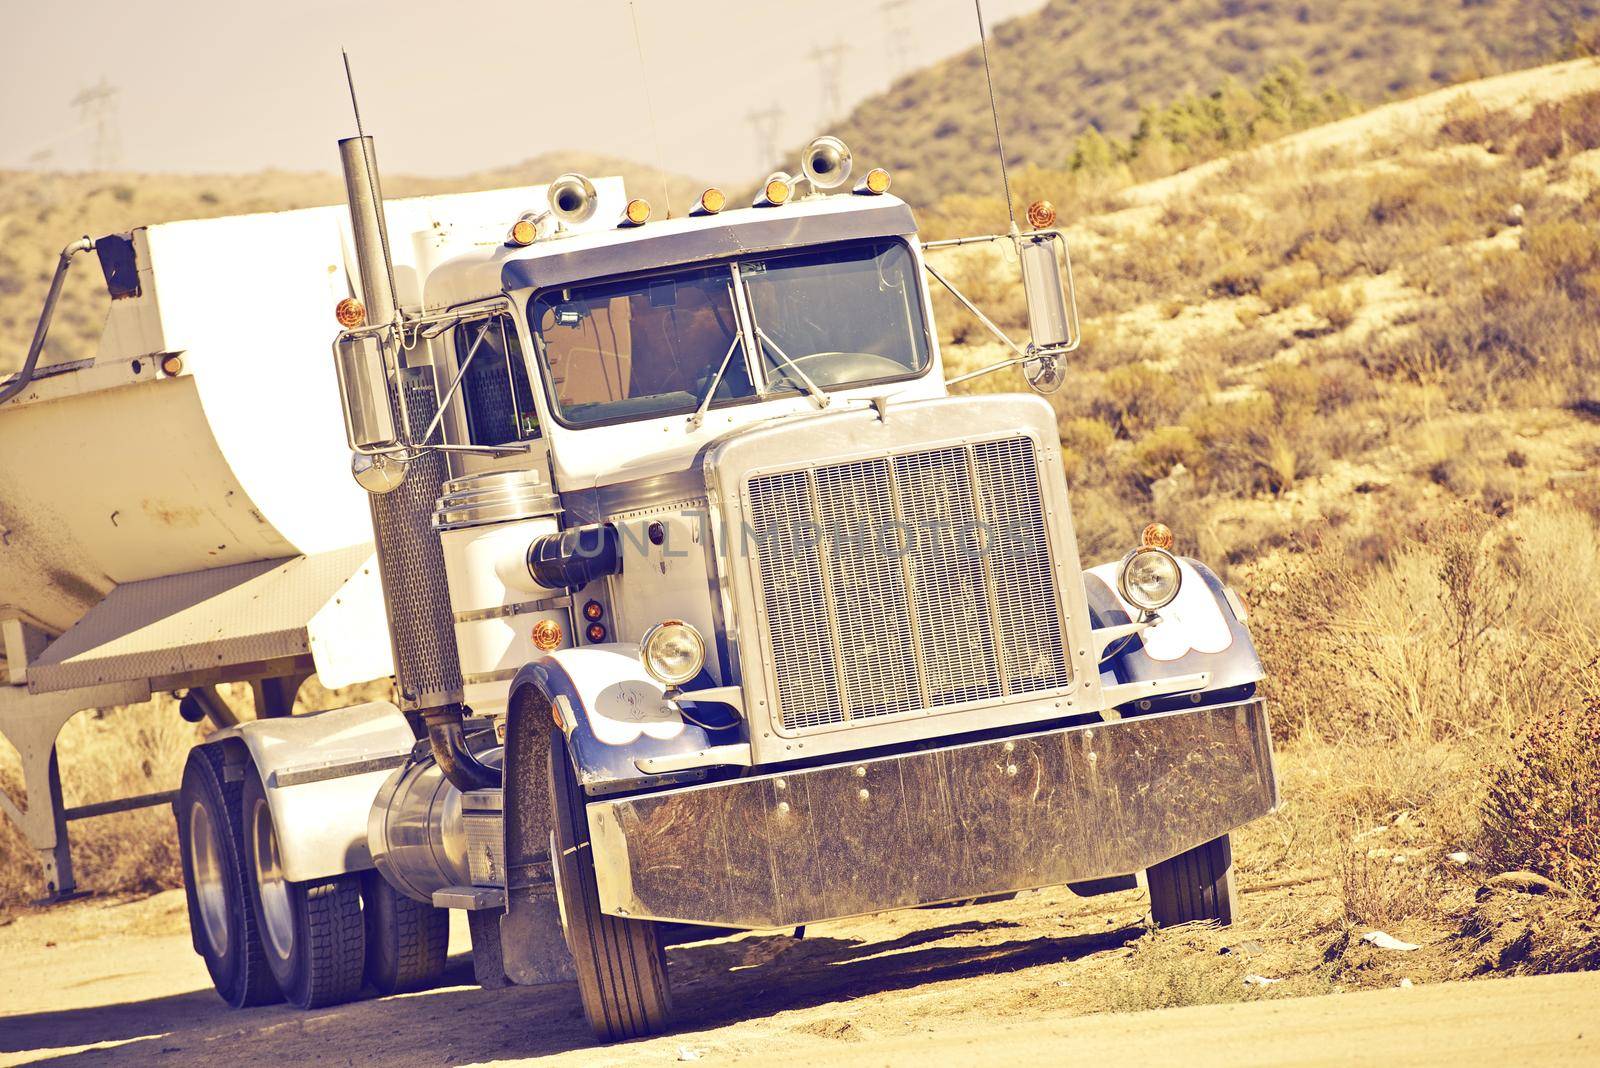 Aged American Truck in Southern California USA in Vintage Colors. Transportation and Logistics Theme. Transportation Photo Collection. by welcomia